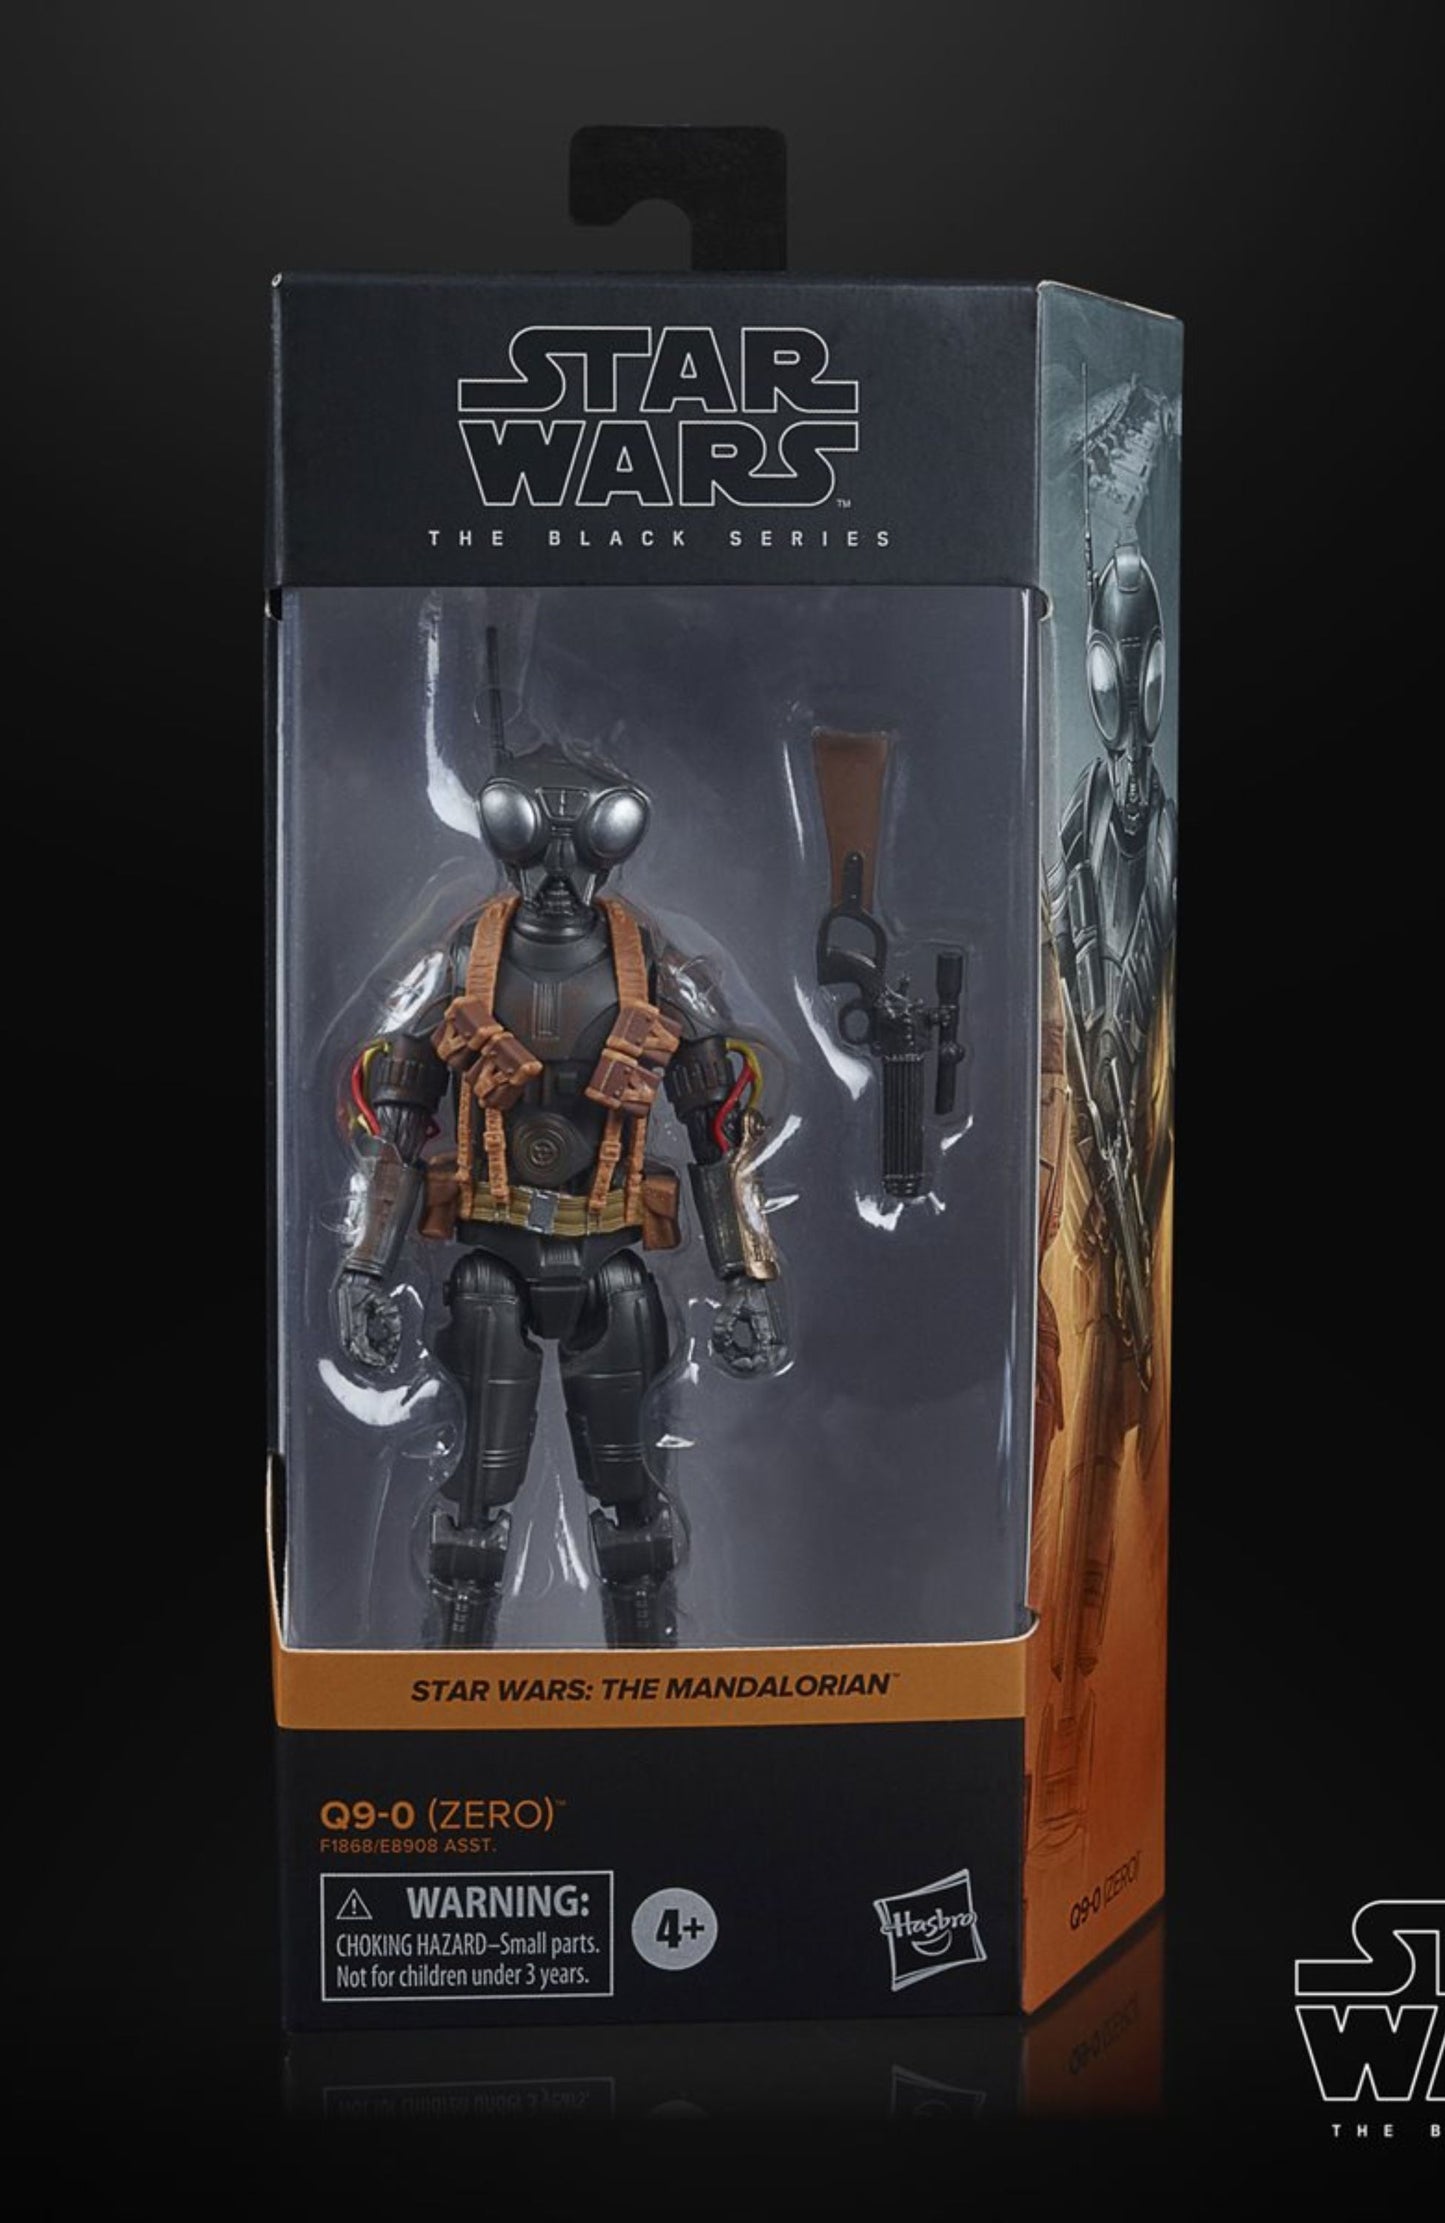 Star Wars The Black Series 6in Droid Zero Action Figure